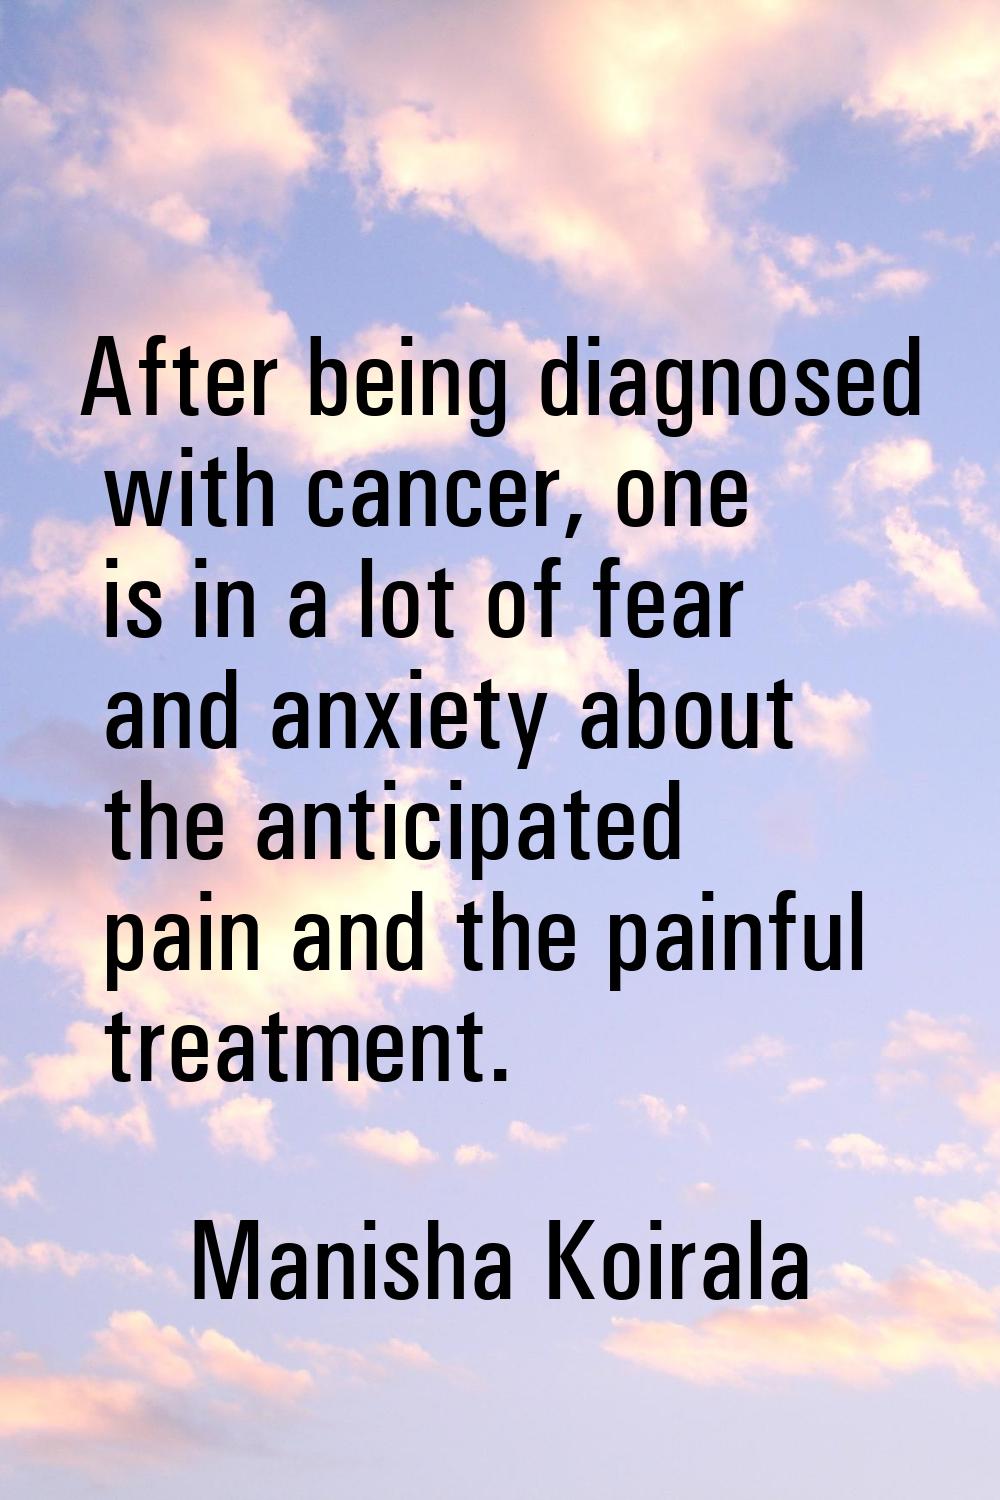 After being diagnosed with cancer, one is in a lot of fear and anxiety about the anticipated pain a